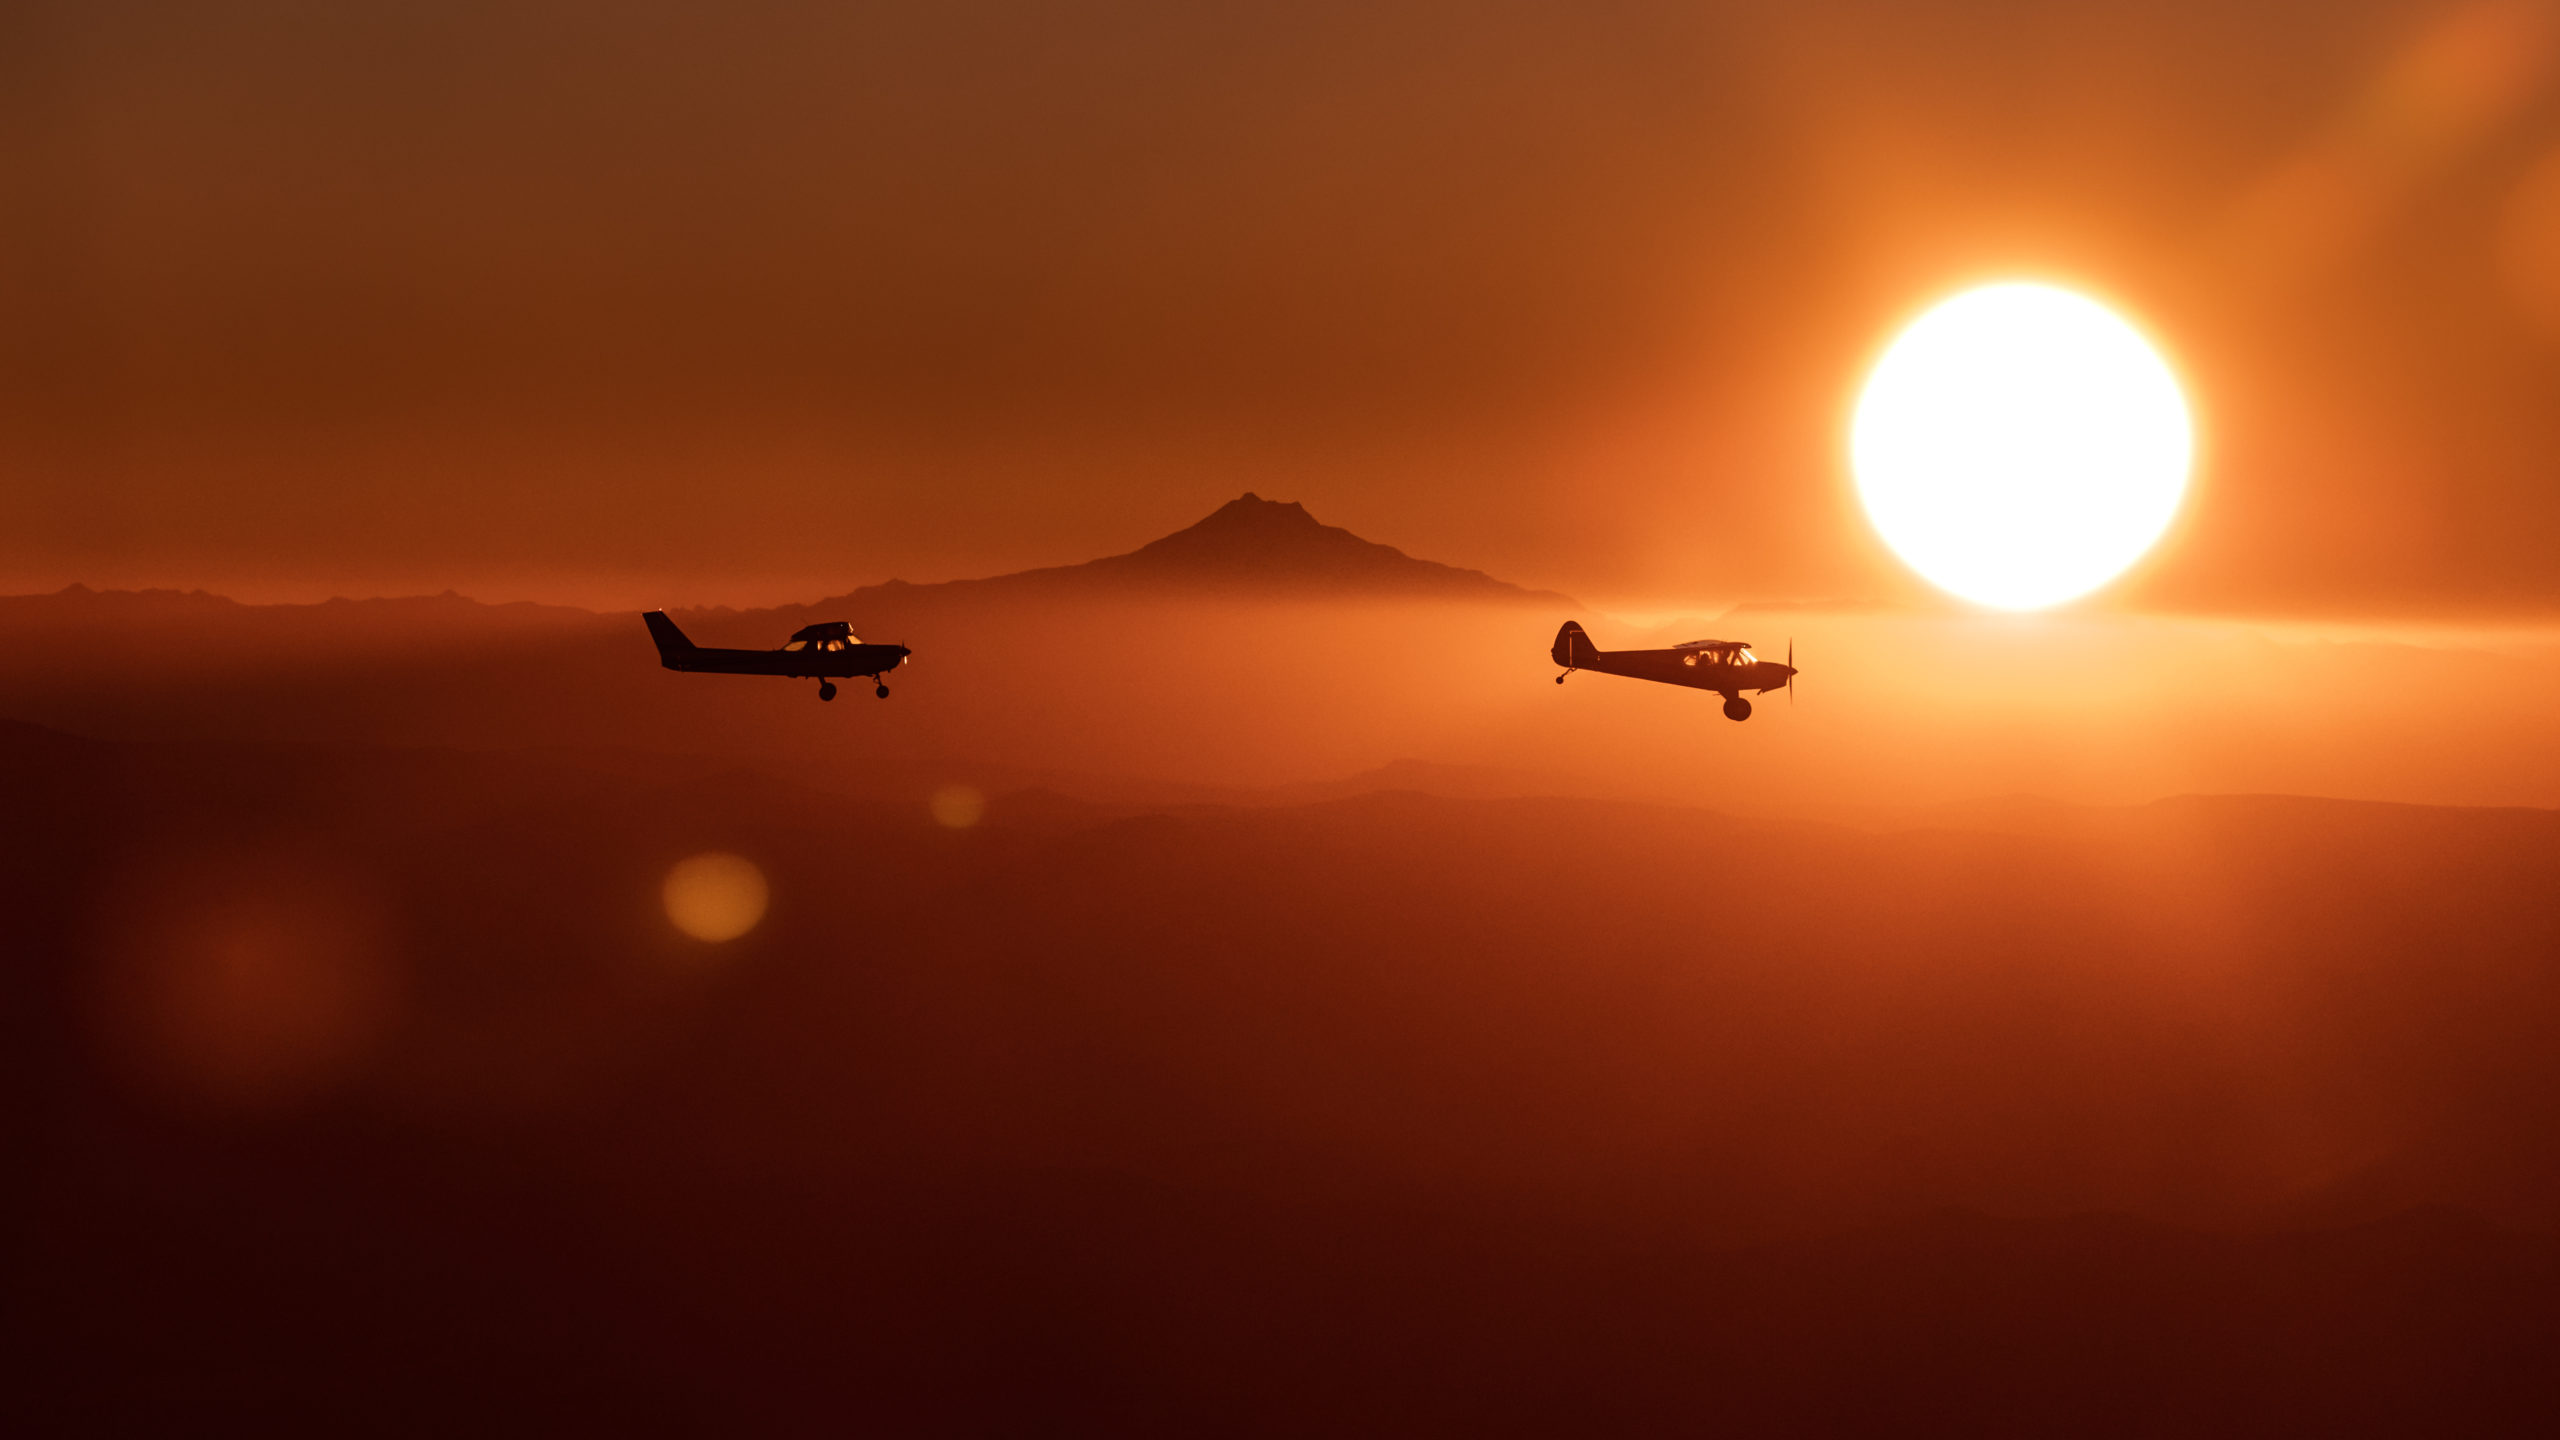 Aviation Photography of two airplanes flying near Mount Jefferson in Oregon during Sunset. Shot using a telephoto lens.